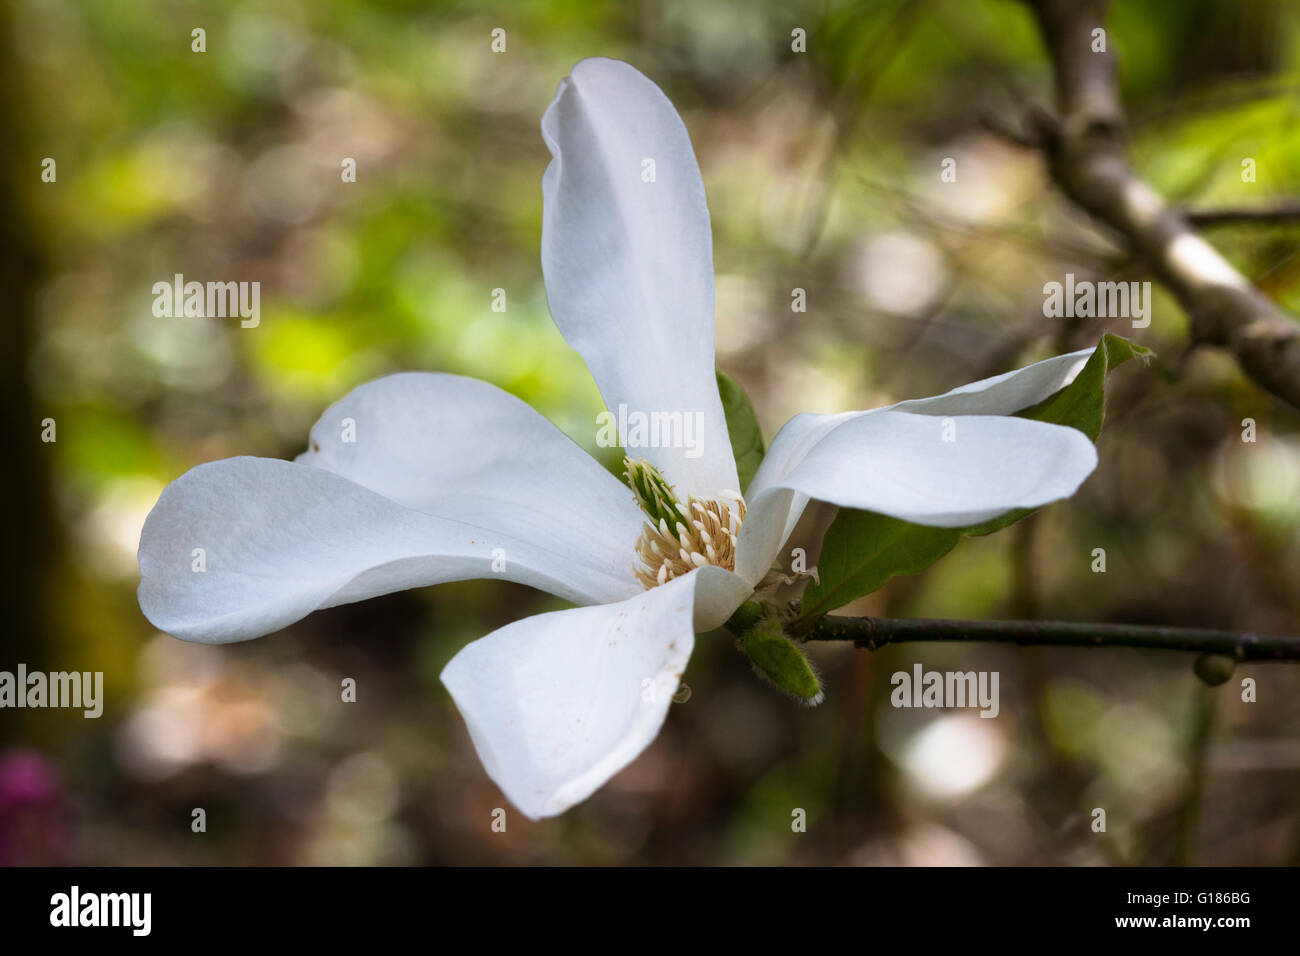 White flower of the compact small, spring flowering tree, Magnolia x loebneri 'Merrill' Stock Photo